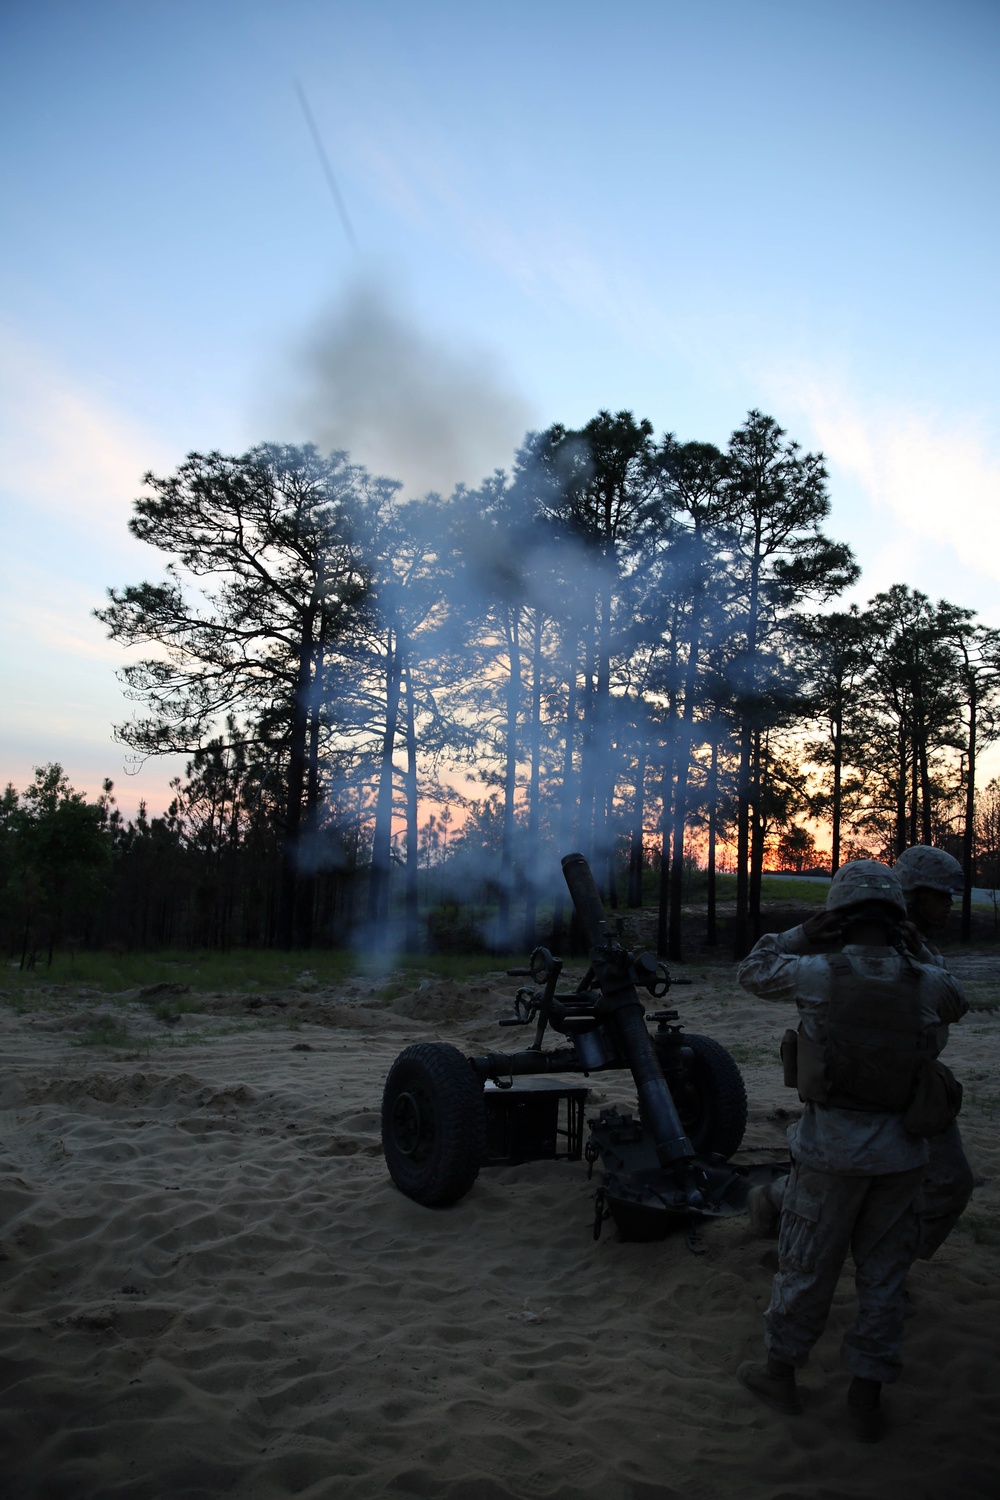 10th Marines integrates with AAVs for Rolling Thunder